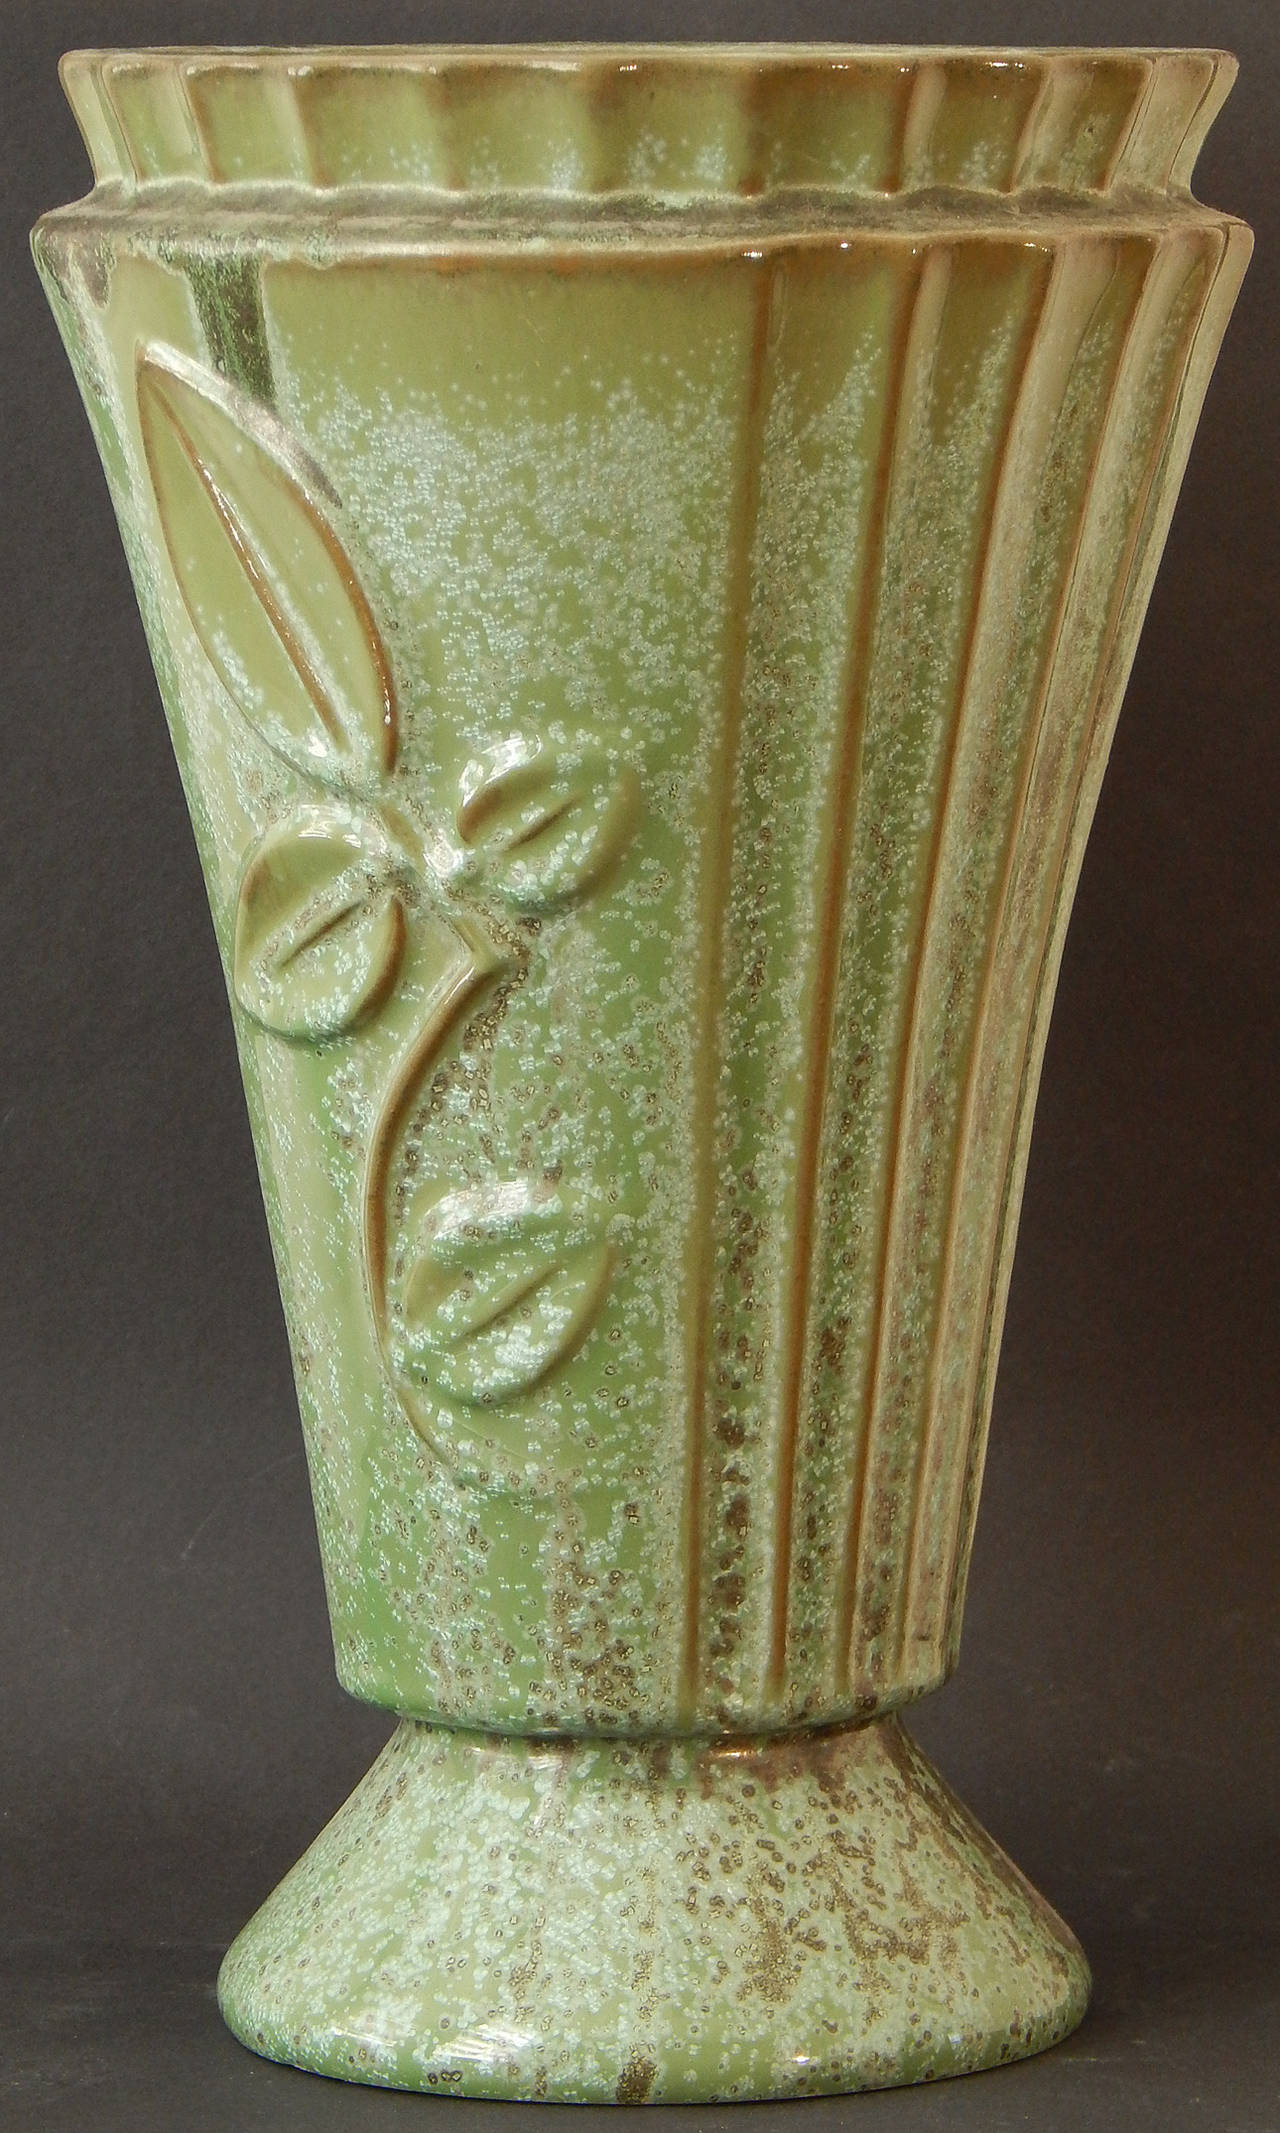 A very rare form, but glazed with the gorgeous mottled and streaky glaze that Fulper Pottery was famous for, this fluted, flaring vase is decorated with deep bas relief leaf and branch forms that are stylized in the Classic Art Deco manner. Founded